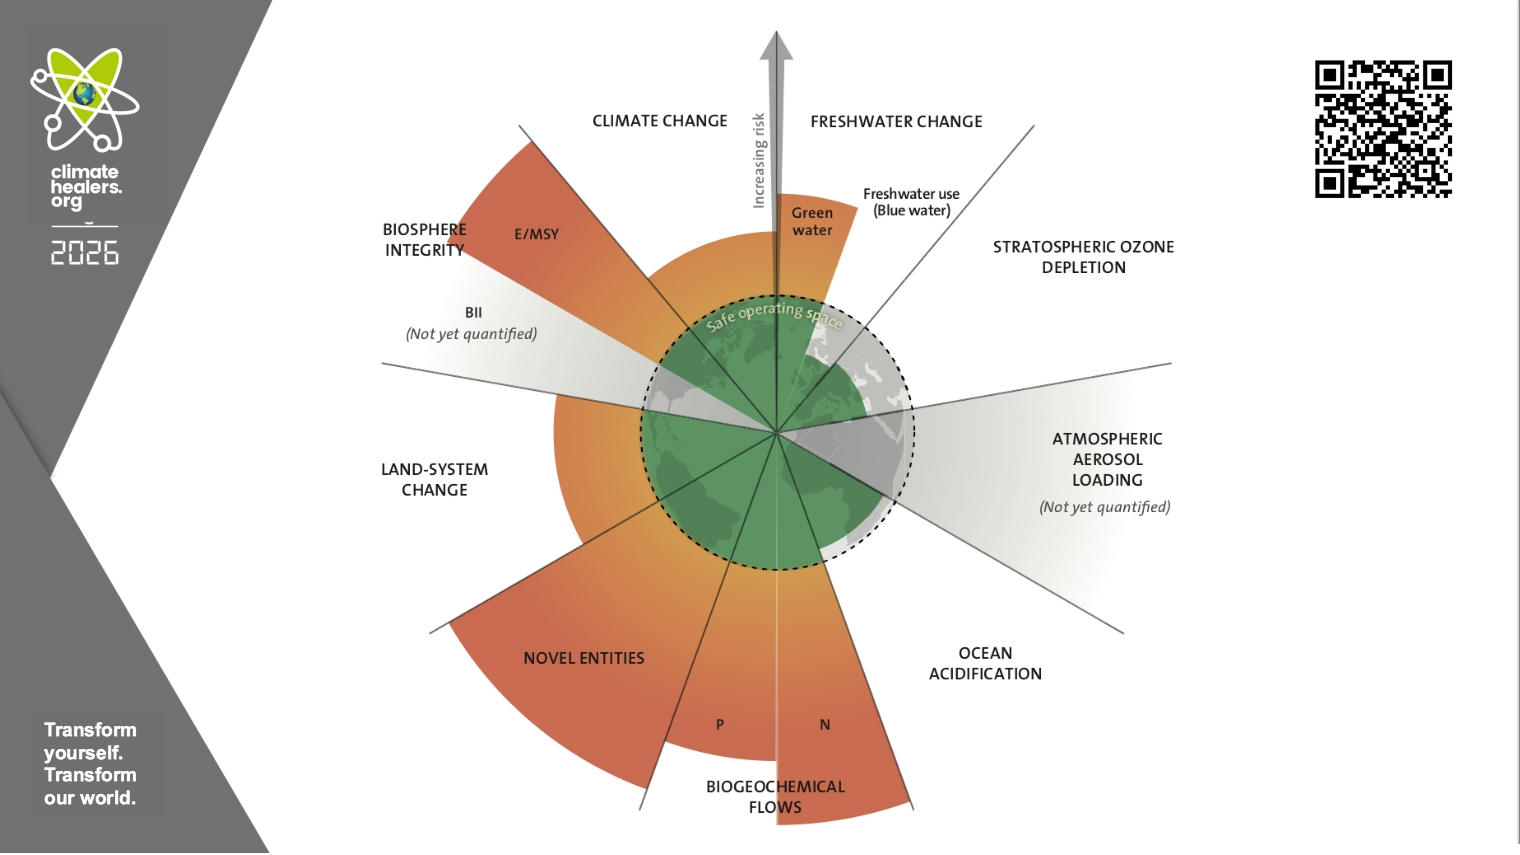 Figure showing the major planetary boundaries and how seven of them have been violated by human beings